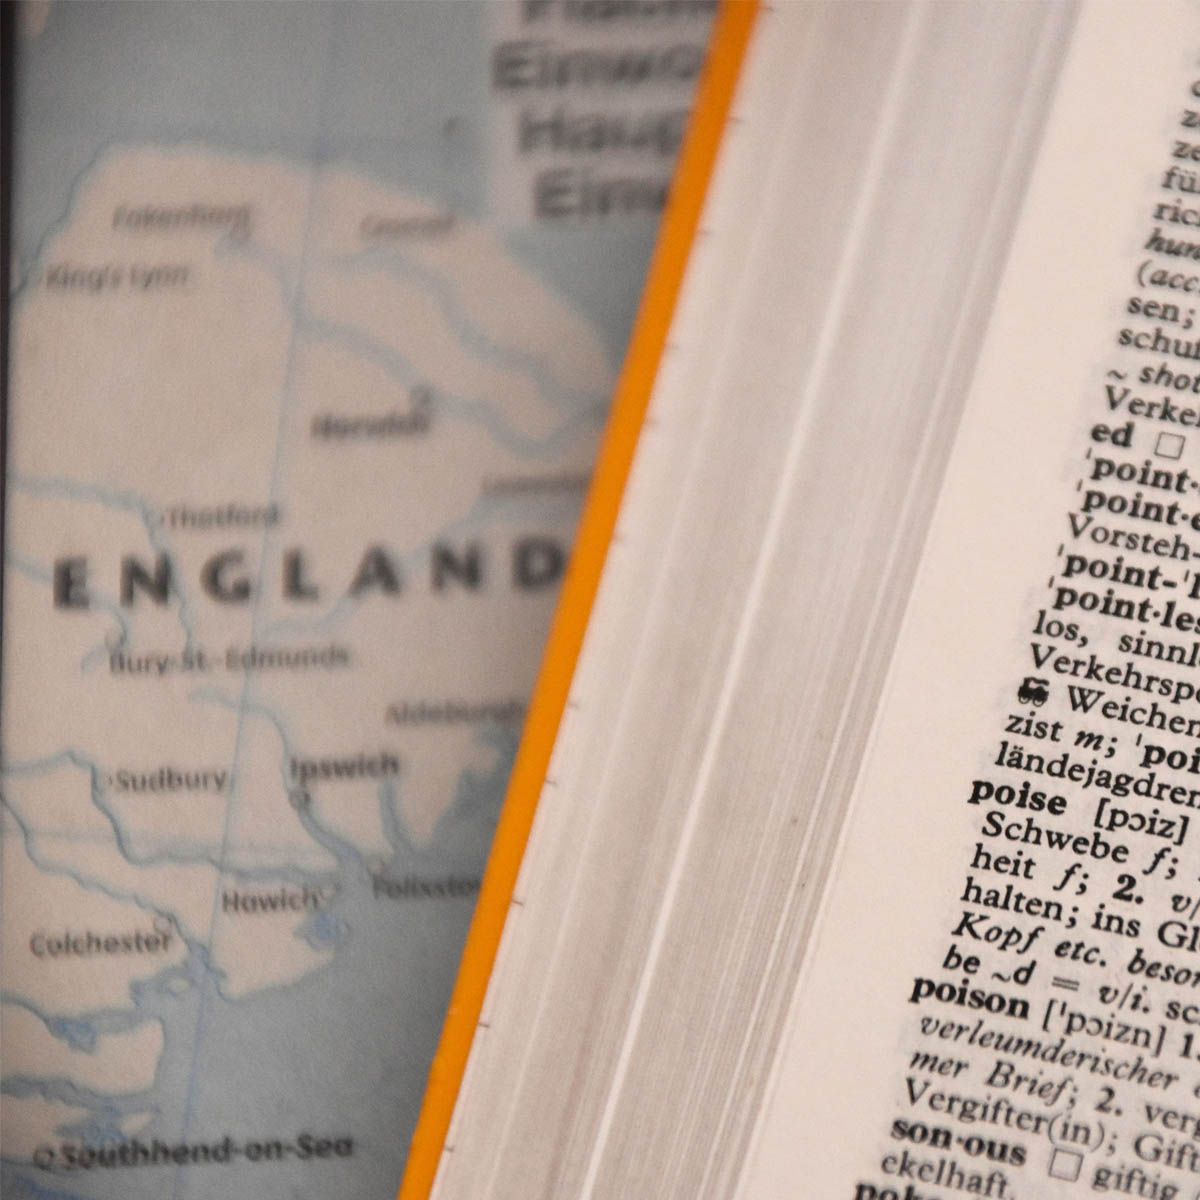 An open book and a map of England